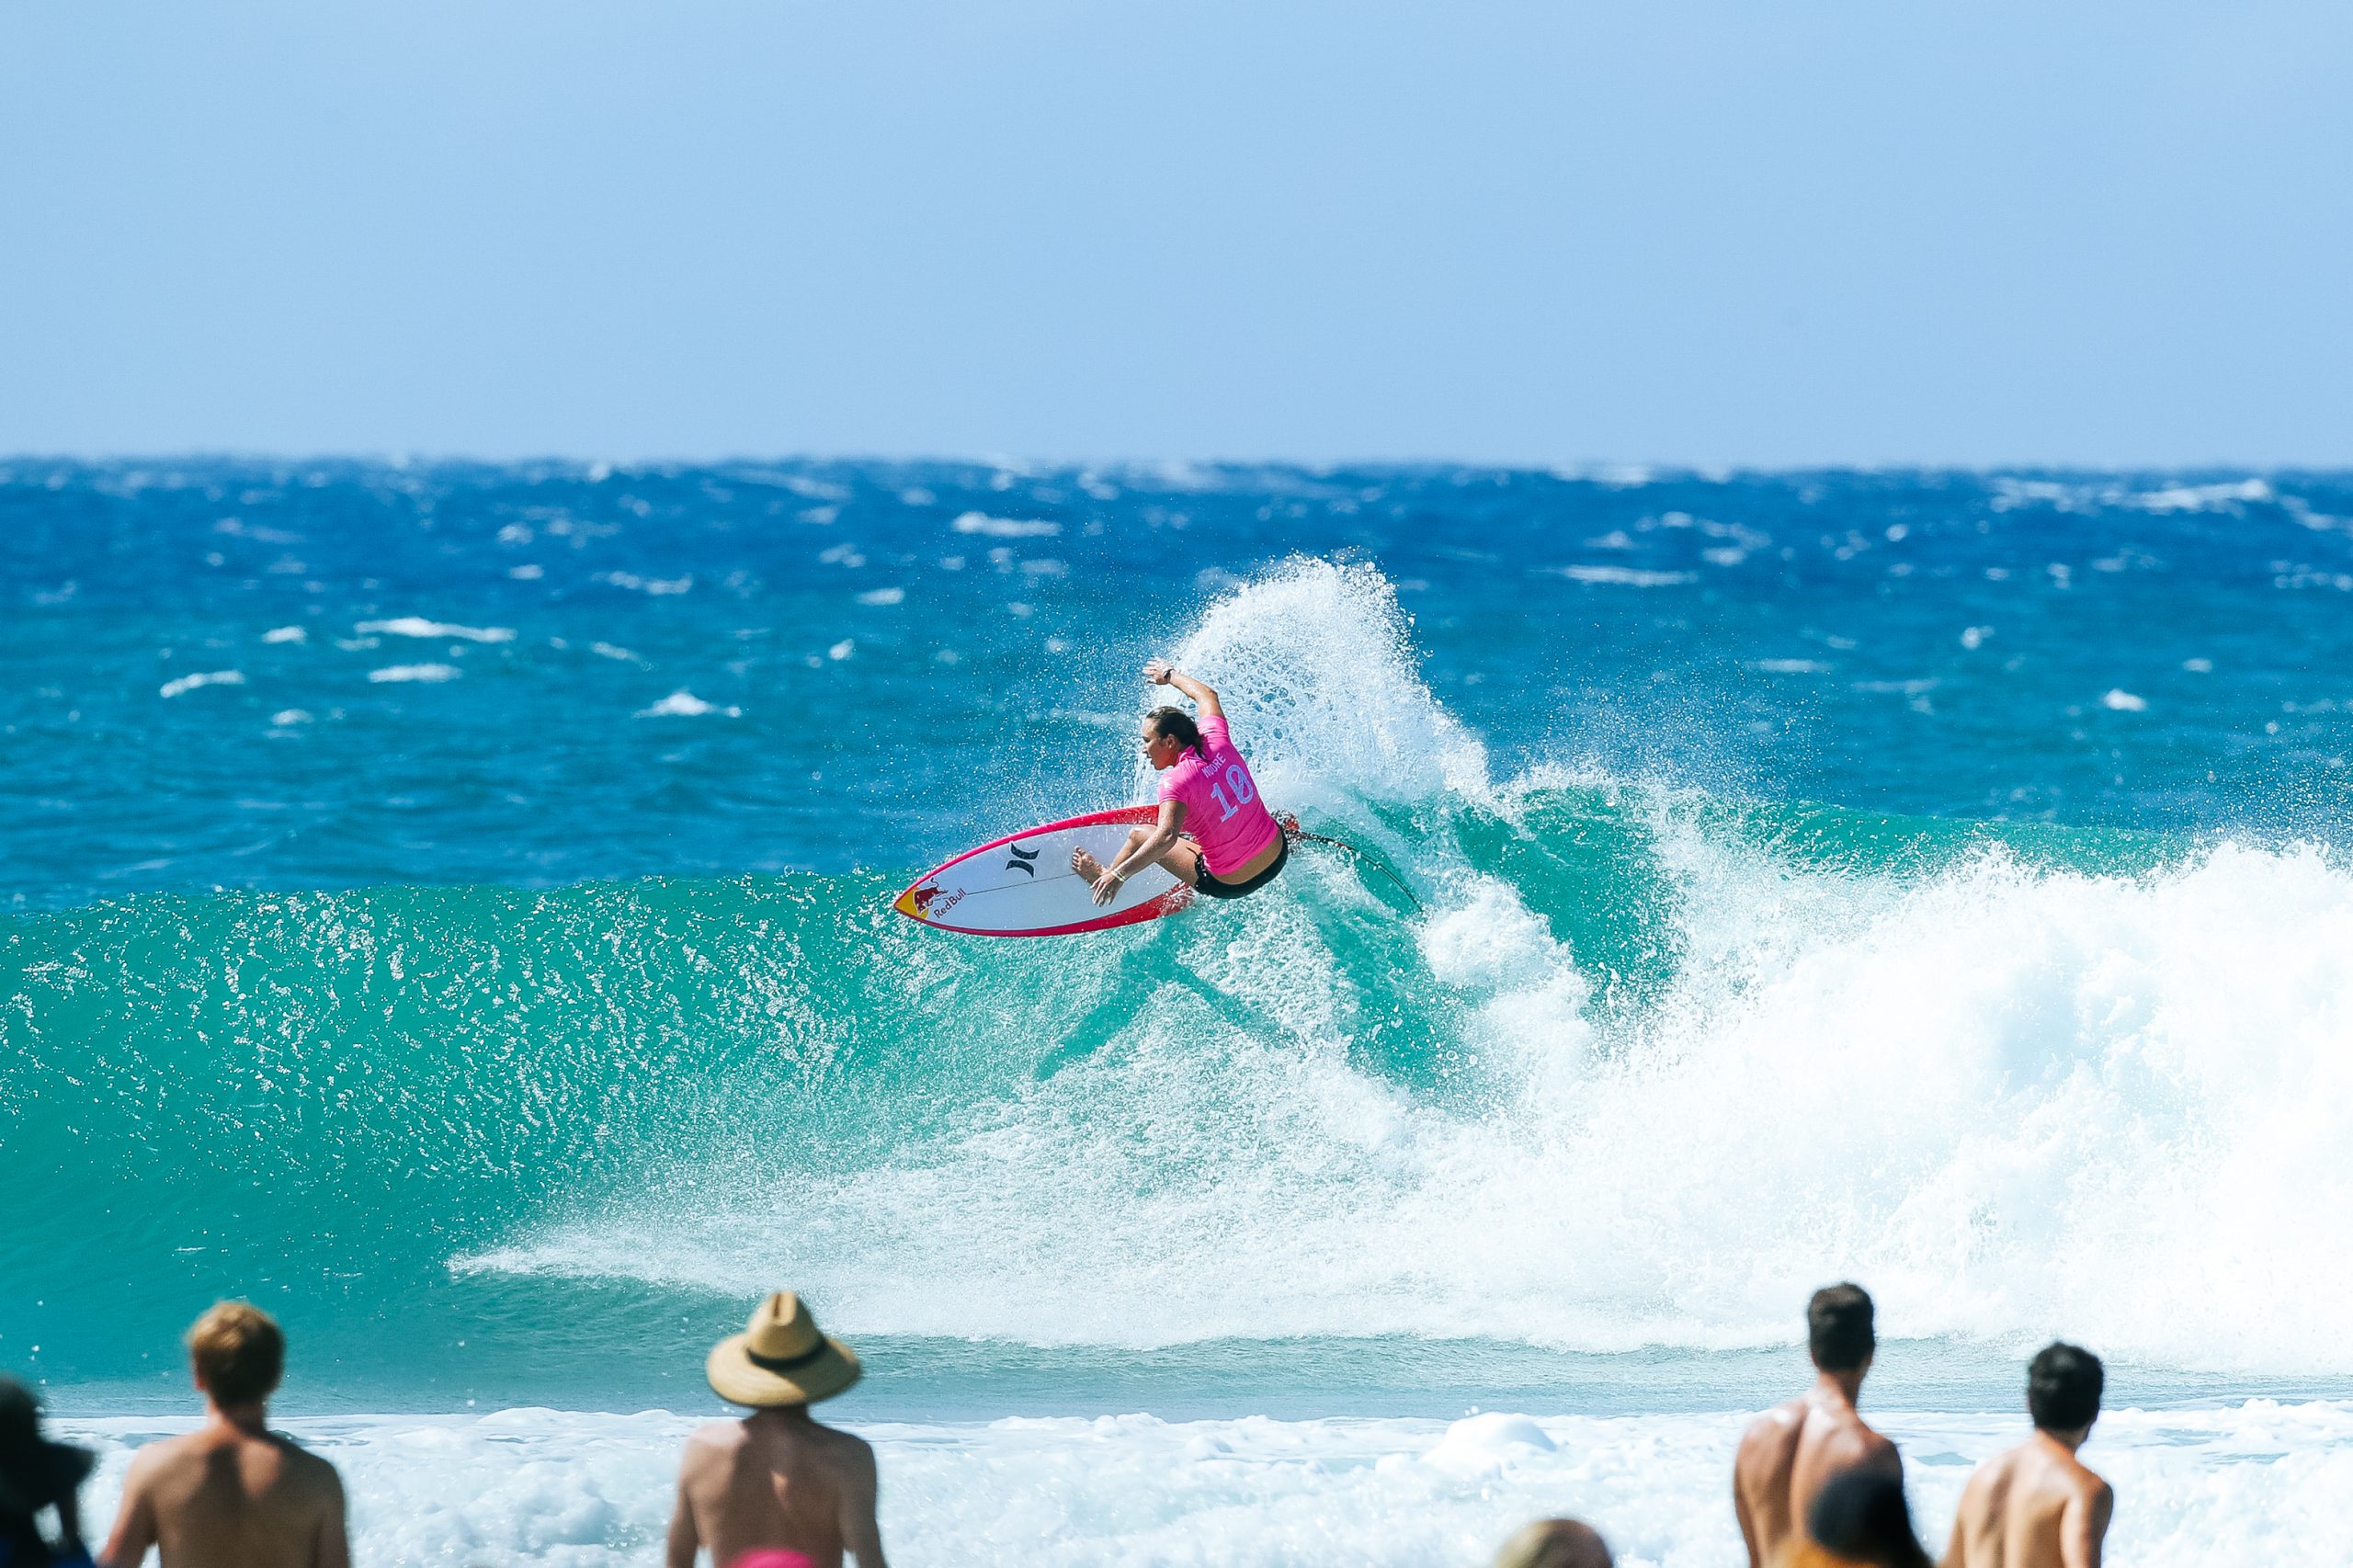 The Gold Coast – the home of surfing this May